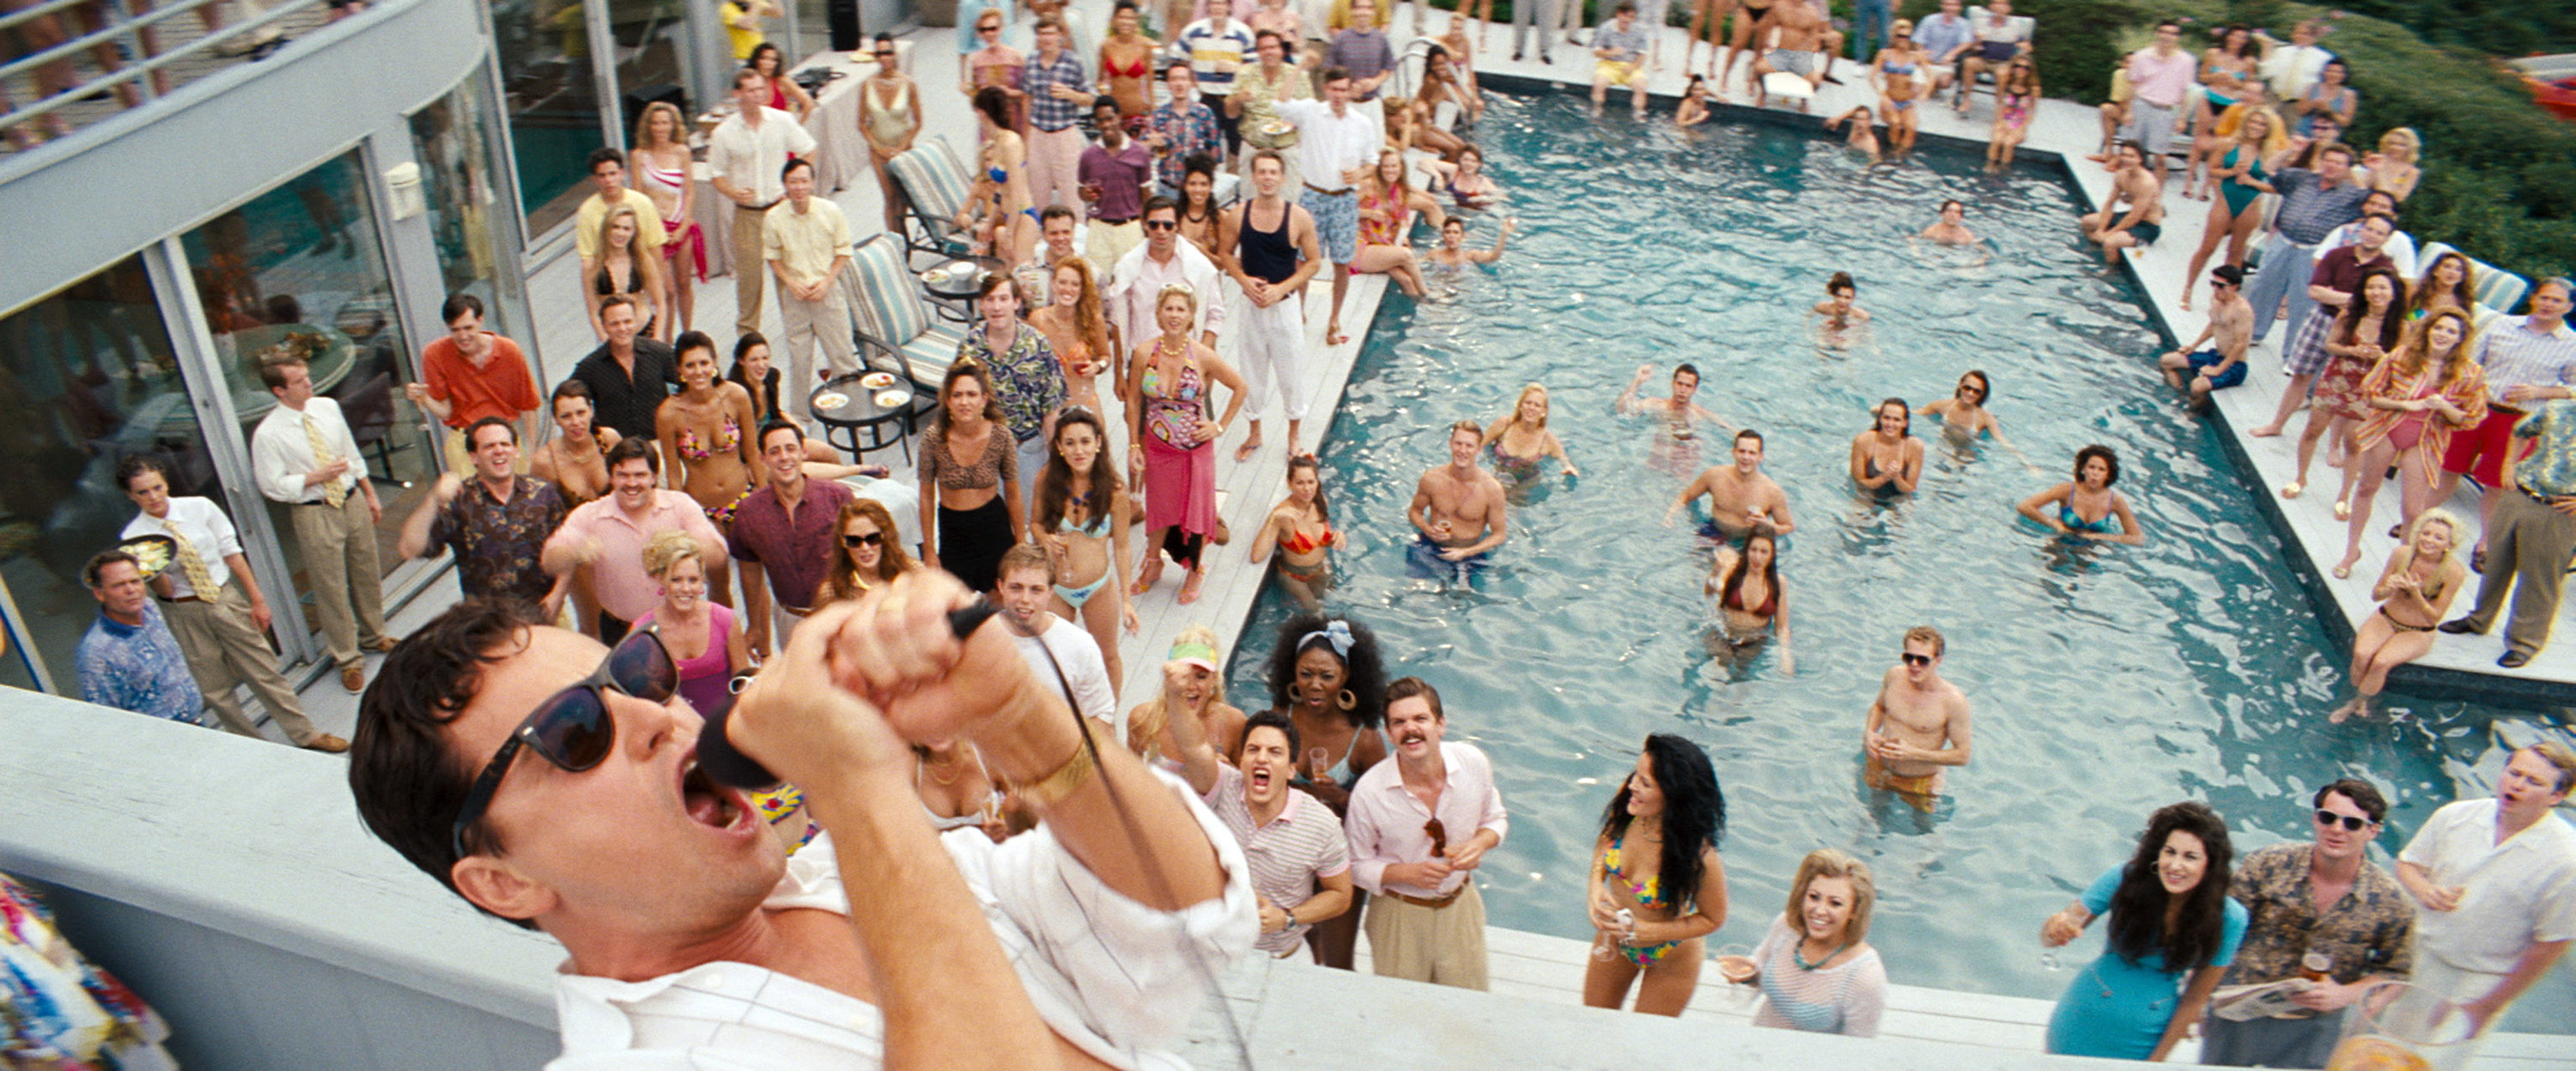 Jordan Belfort yells into a microphone at a luxurious pool party